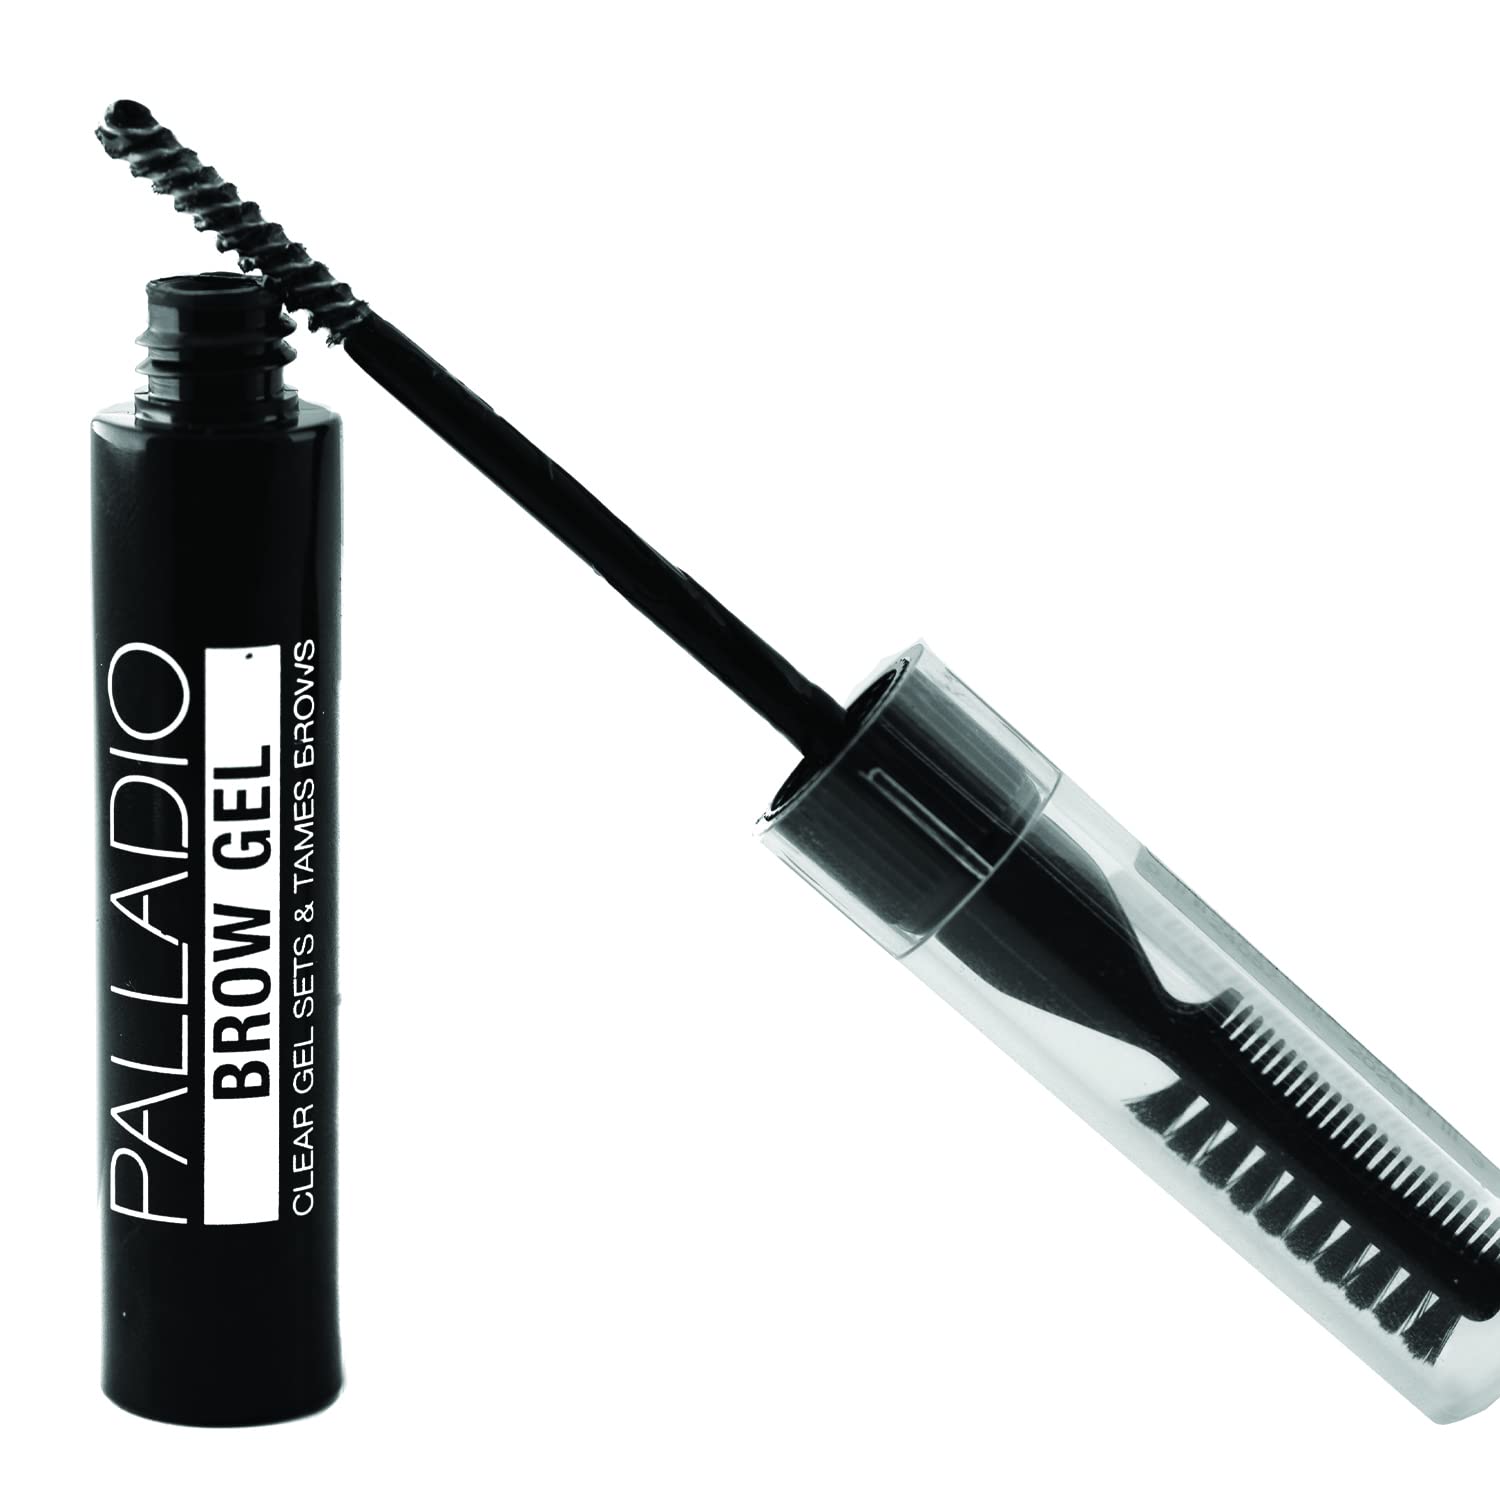 Palladio Brow Styler Clear Brow Gel, Innovative Formula, Holds and Grooms Brows, Brow Setter, Natural Look, Lightweight, Multi-Purpose Conditioning Formula, Doubles as a Clear Mascara, Clear